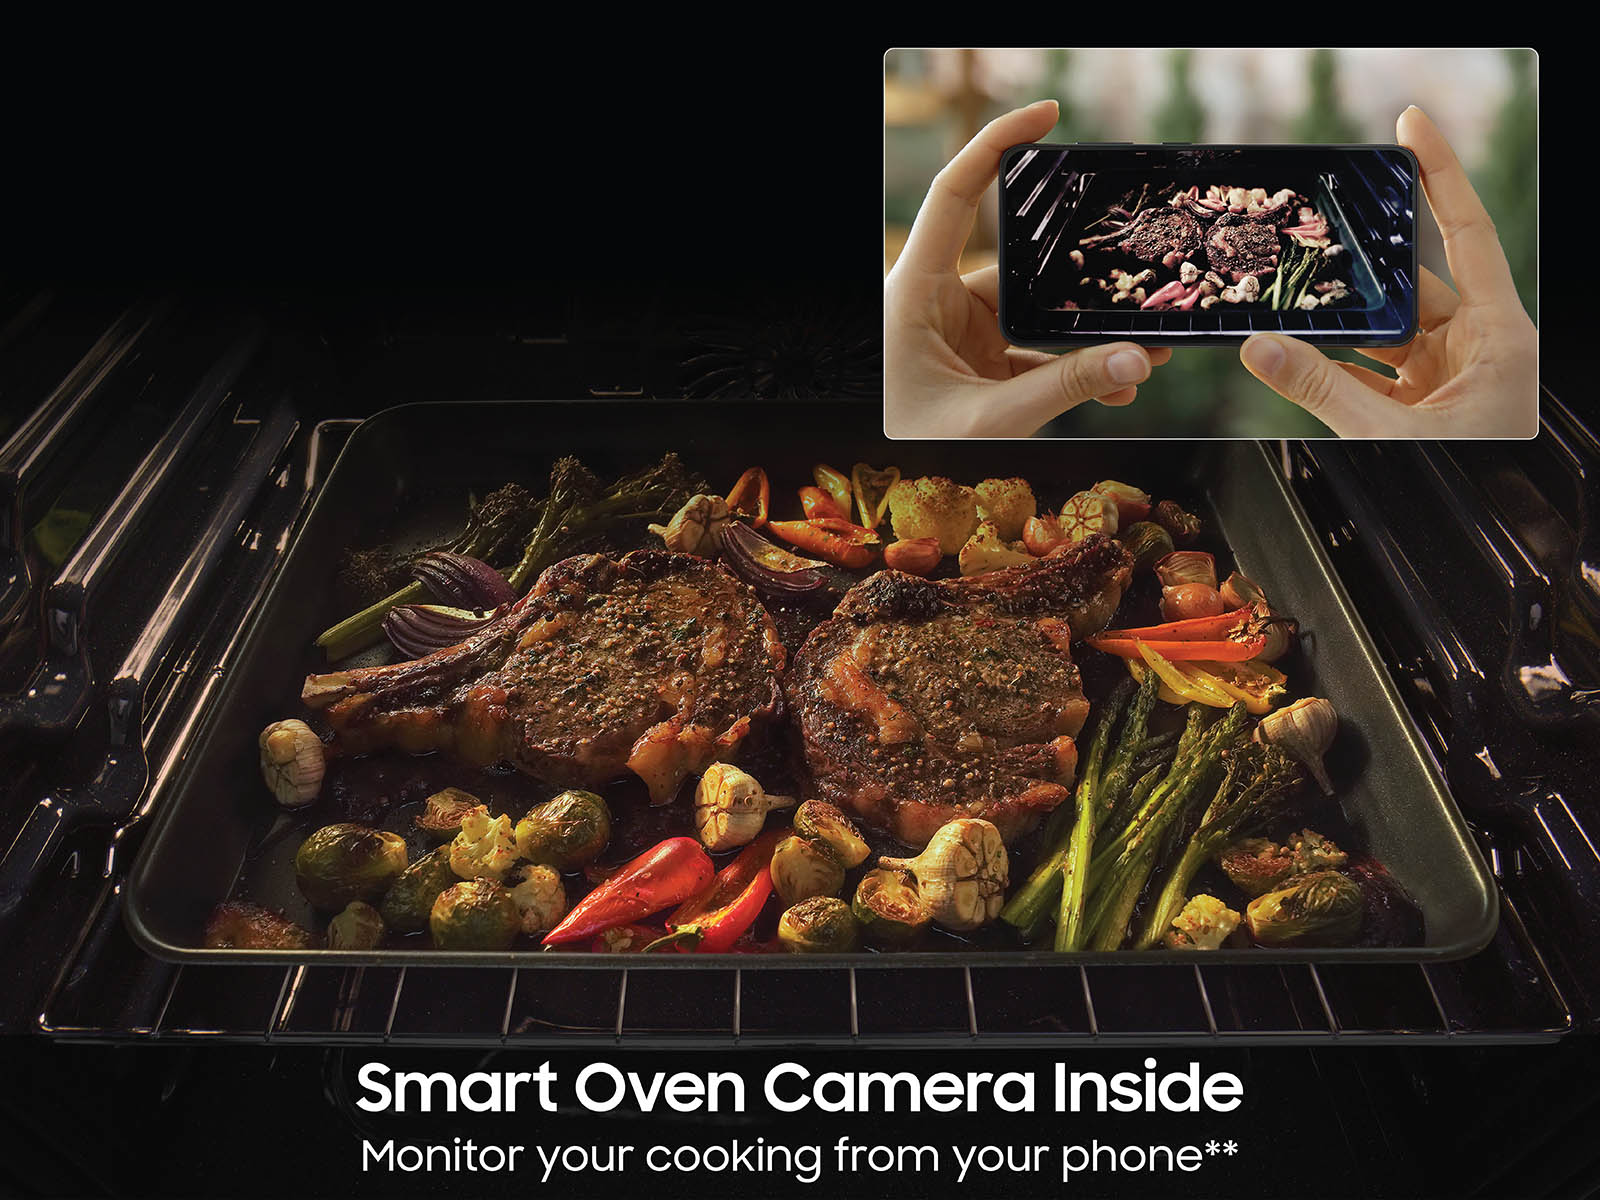 Thumbnail image of Bespoke 6.3 cu. ft. Smart AI Slide-In Induction Range with AI Home & Smart Oven Camera in White Glass